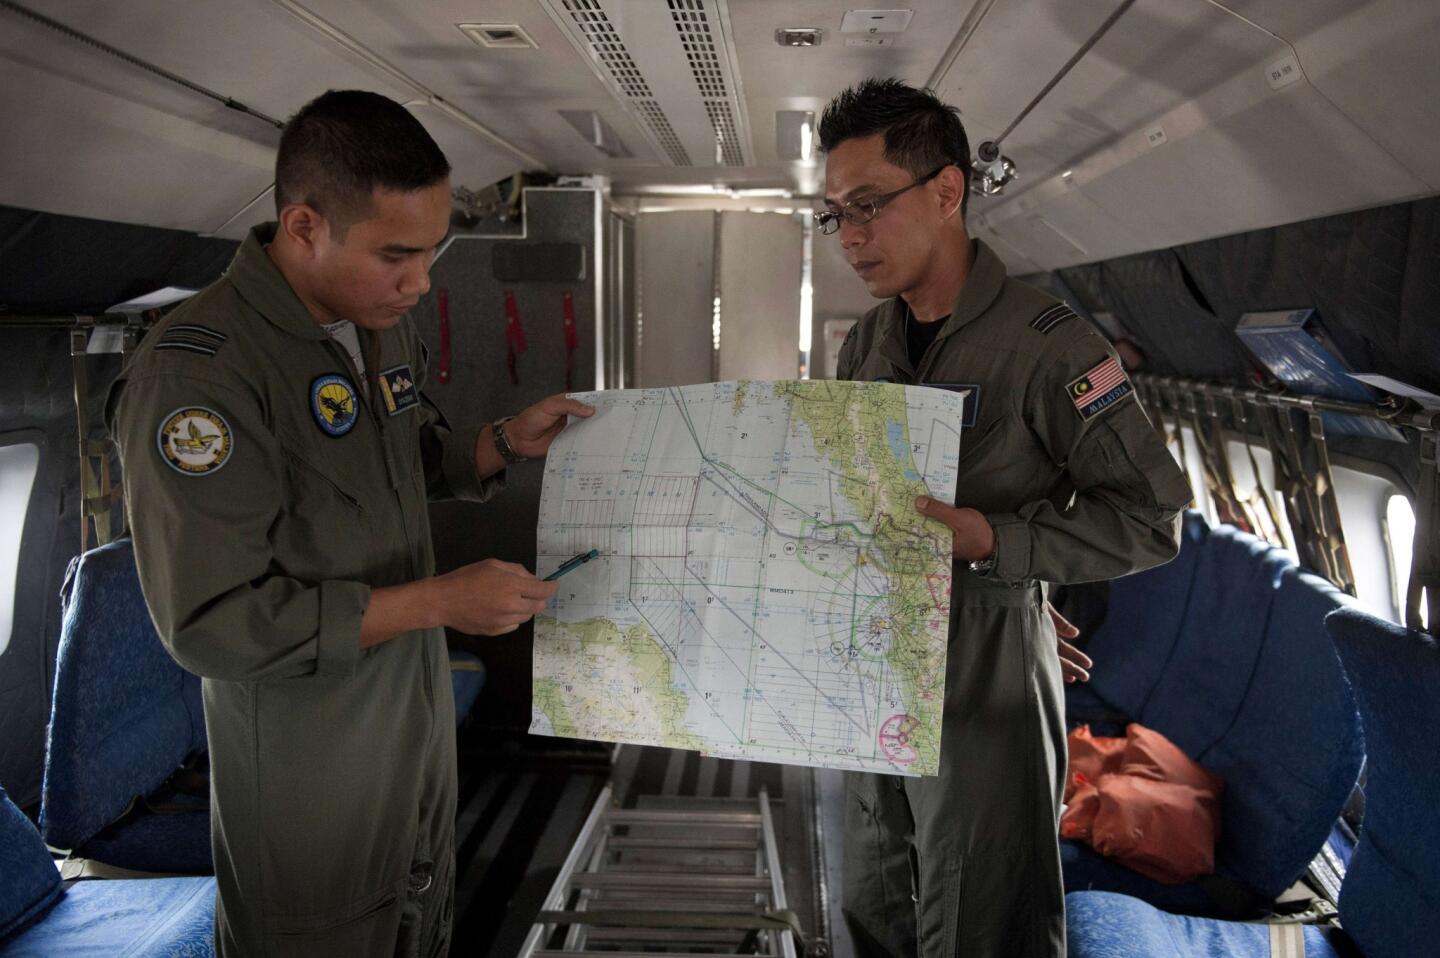 Royal Malaysian Air Force Navigator captain, Izam Fareq Hassan (R) and pilot major Ahmad Shazwan Mohammed (L) show locations on a map during a search and rescue operation to find the missing Malaysia Airlines flight MH370.